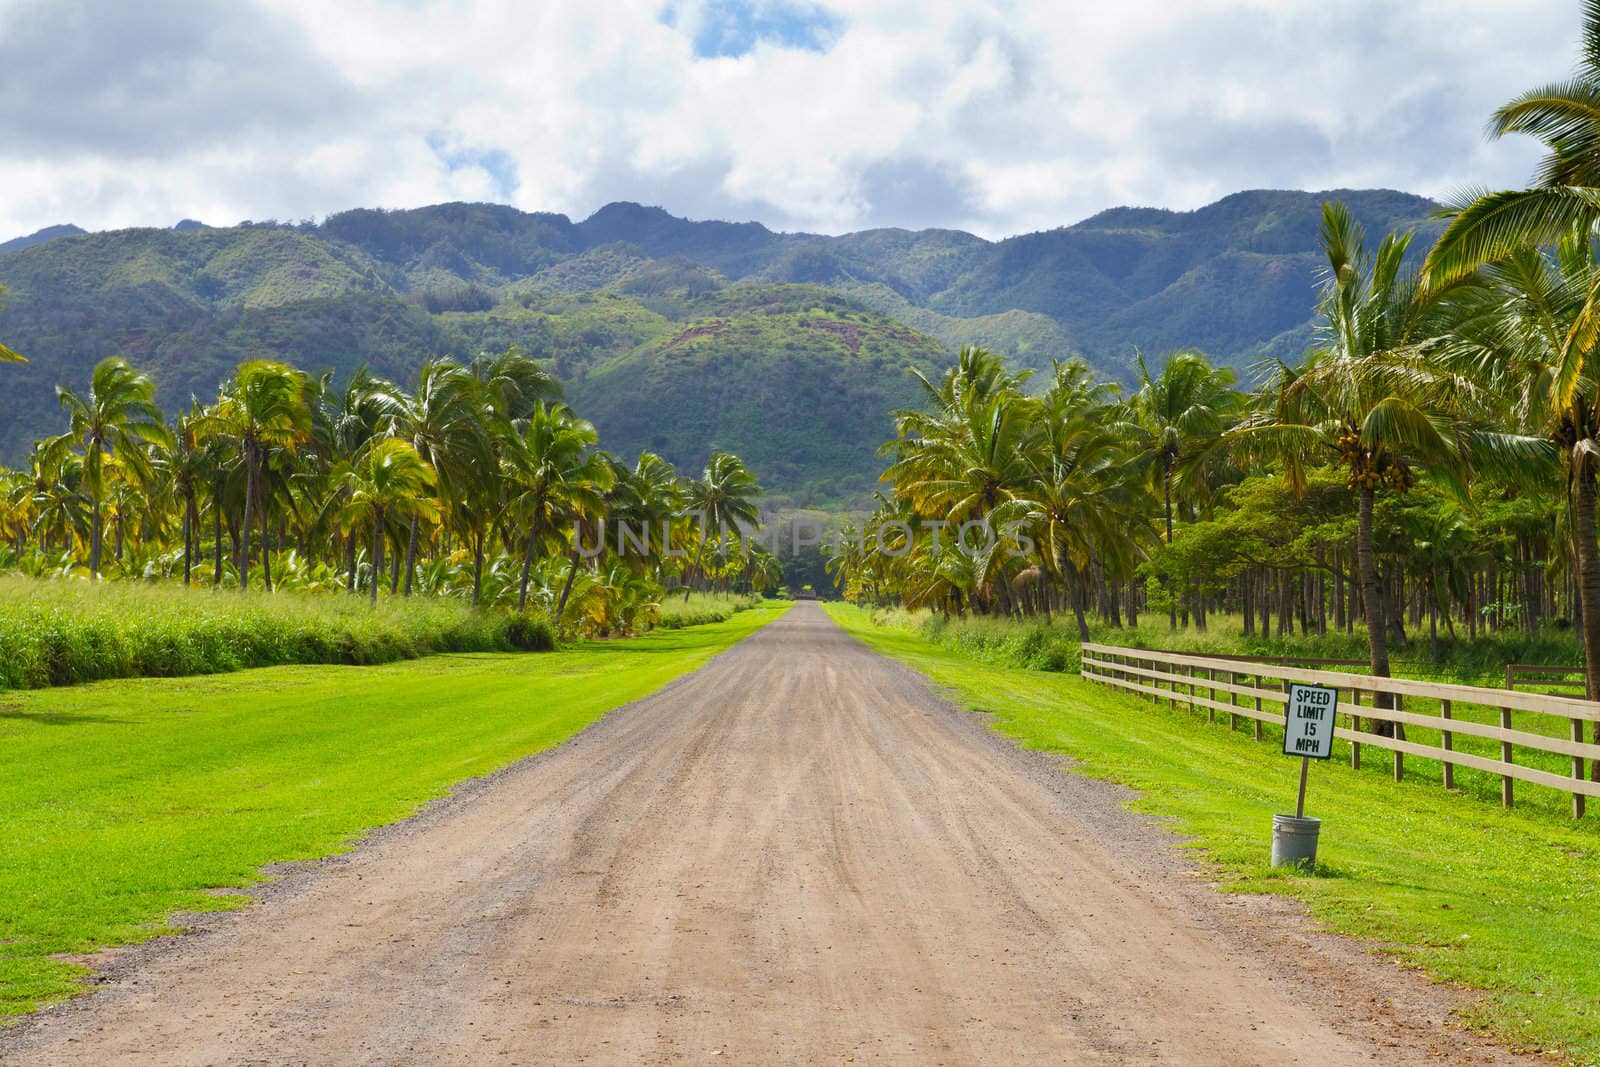 This farm grove of trees is a farming operation where coconuts are grown and harvested in Hawaii along the north shore of Oahu.